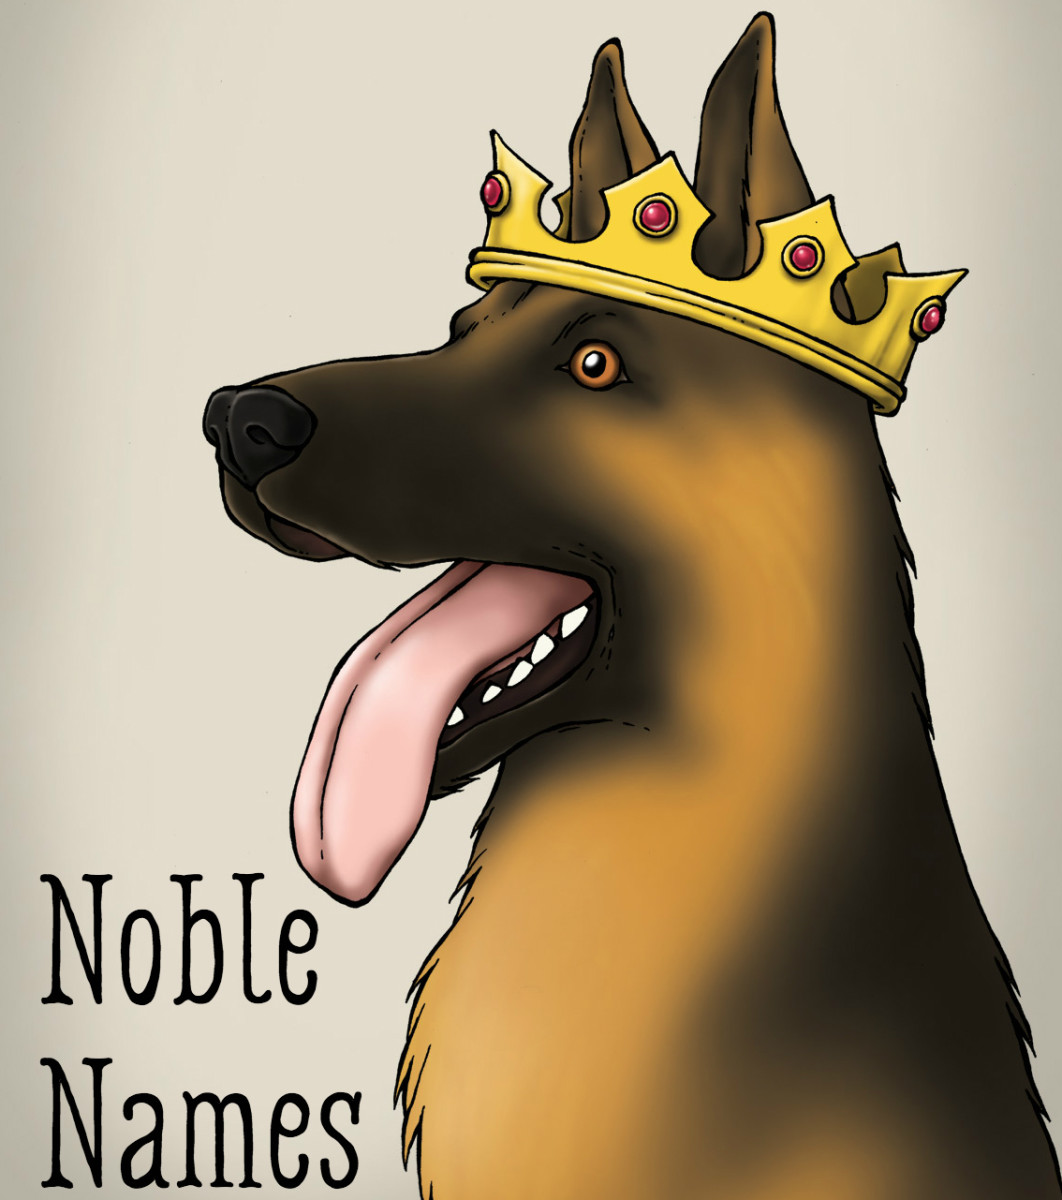 Is your dog the mighty warrior or leader type? One of these names might suit him.